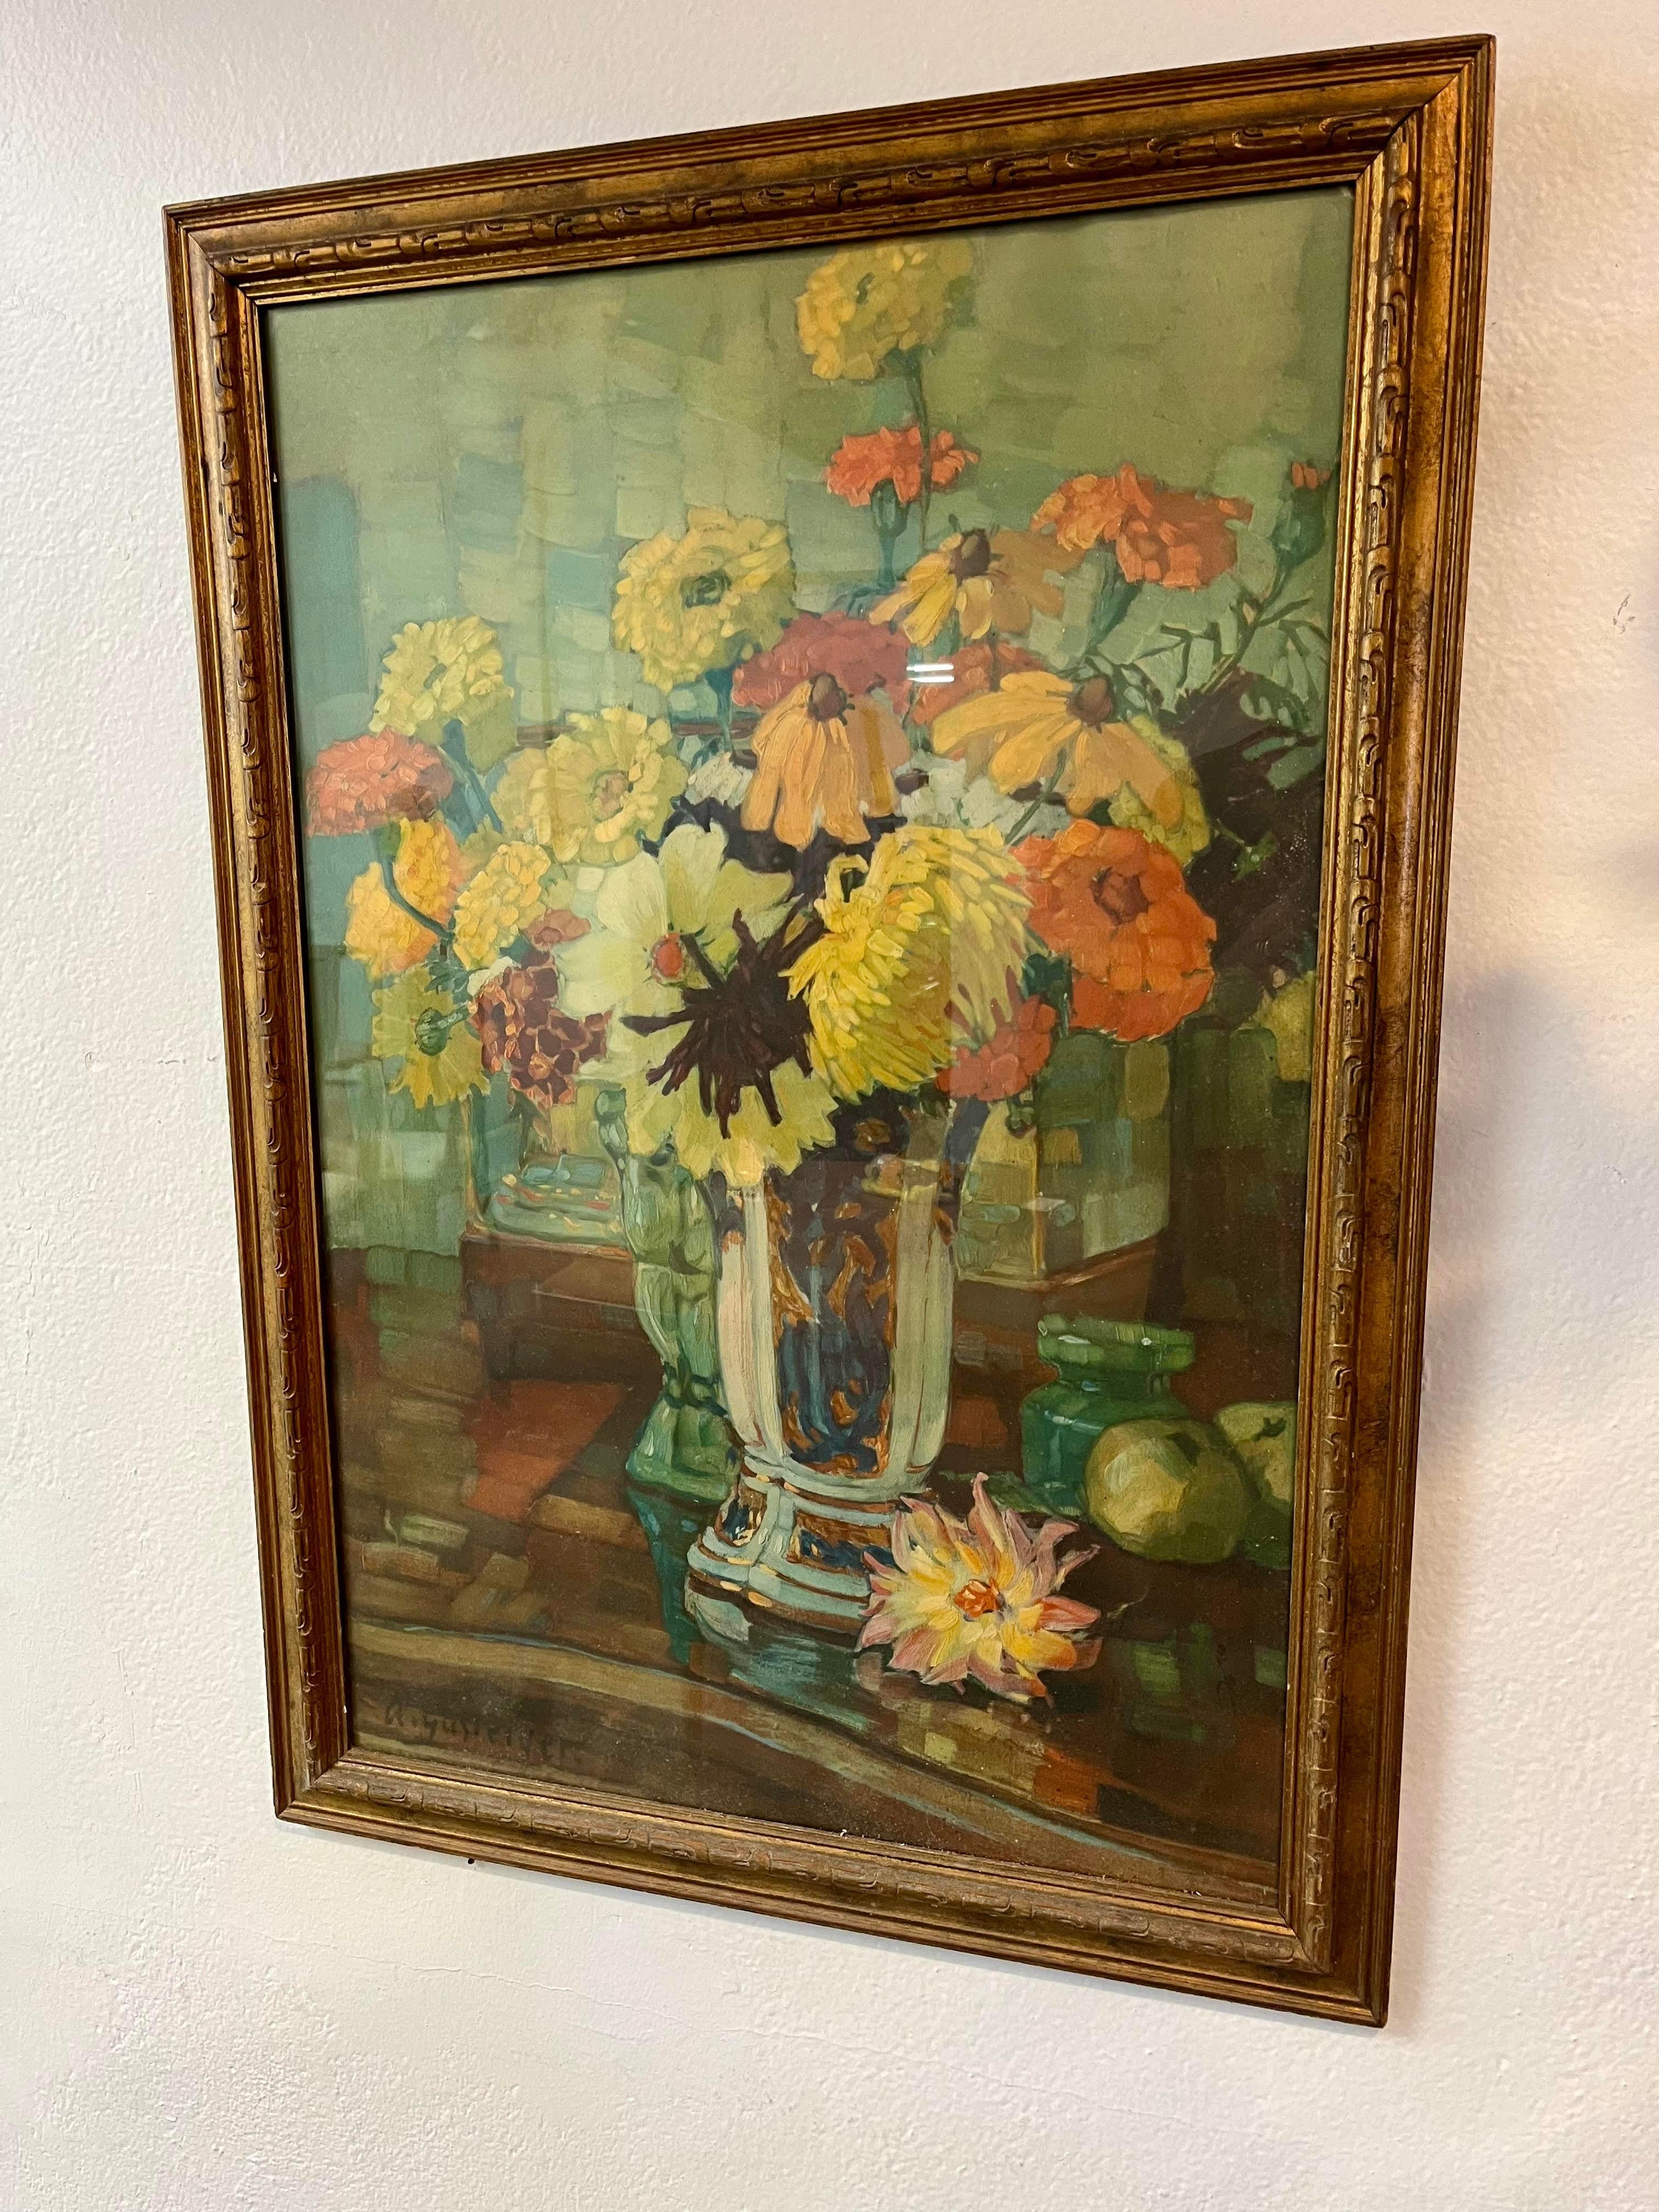 Beautiful Anna Gasteiger (1877-1954) 
Yellow Dahlias in a blue vase. 
Hand signed in the lower left.
